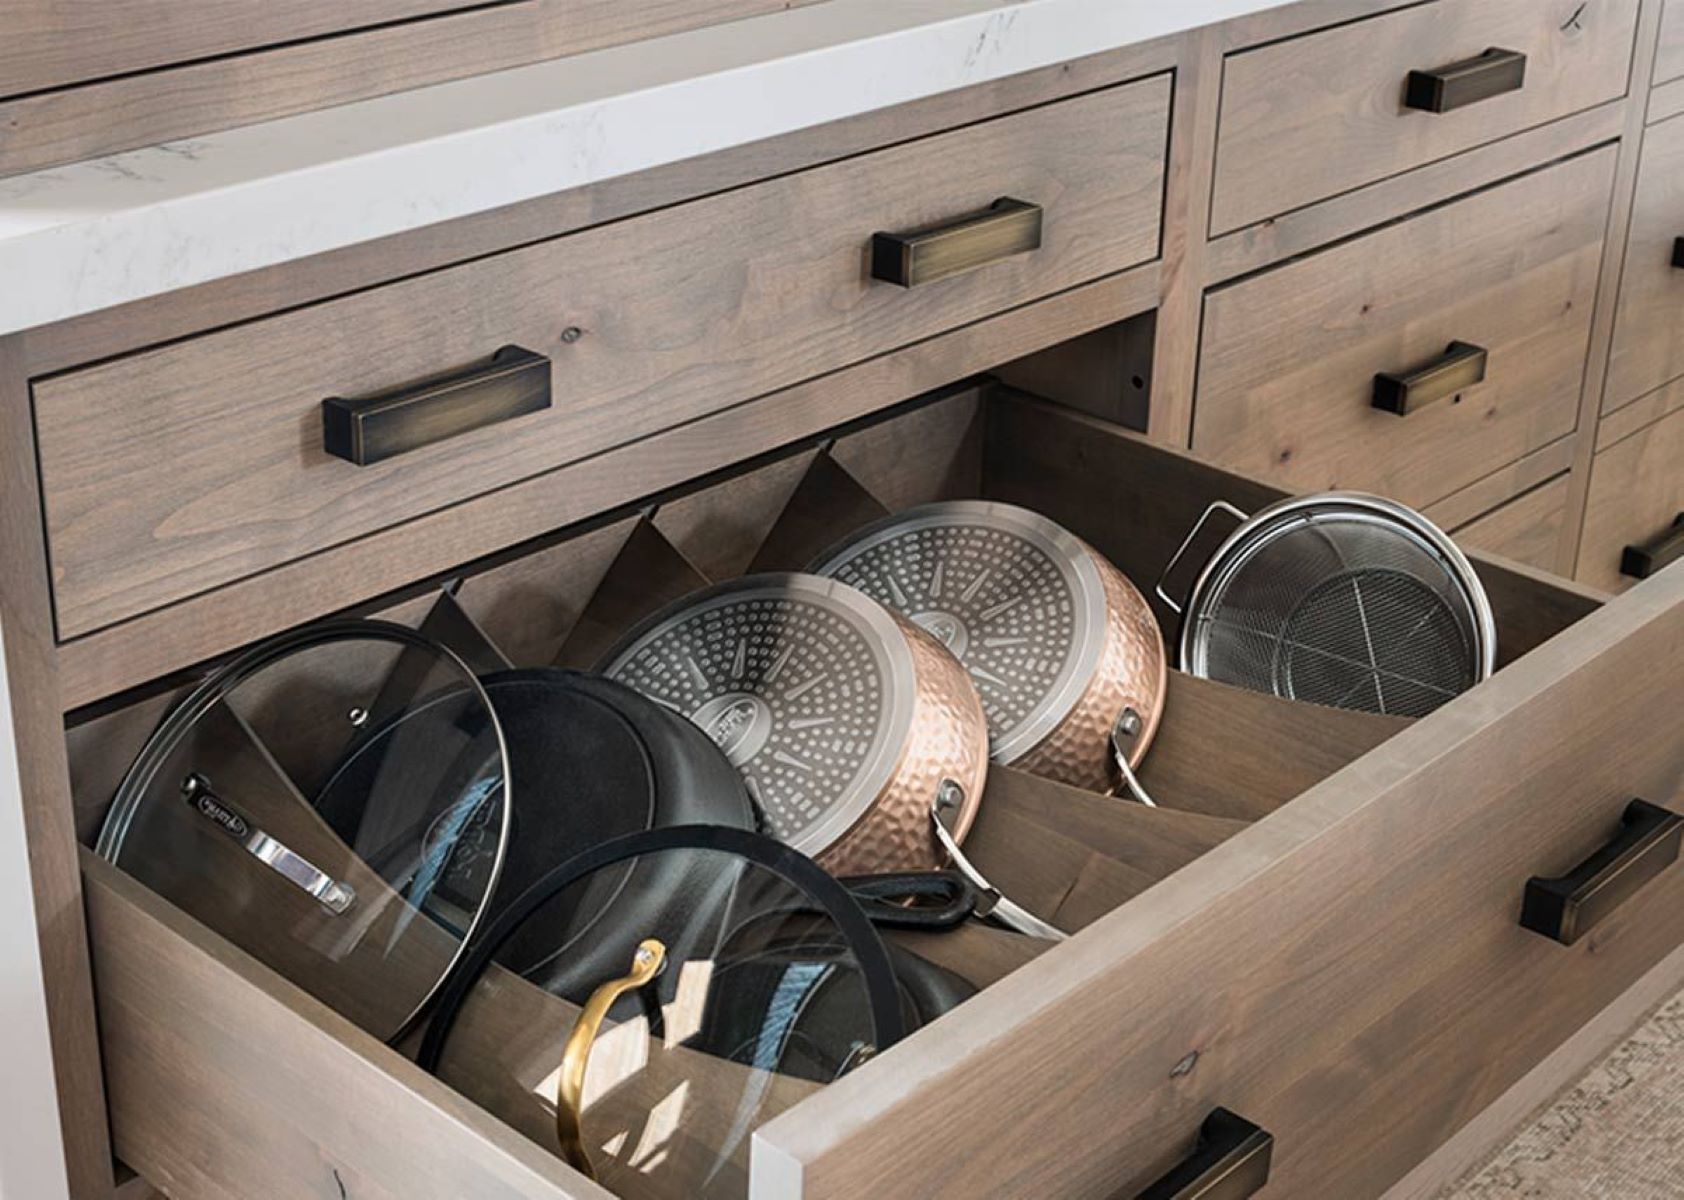 How To Organize Pots And Pans In Cabinet